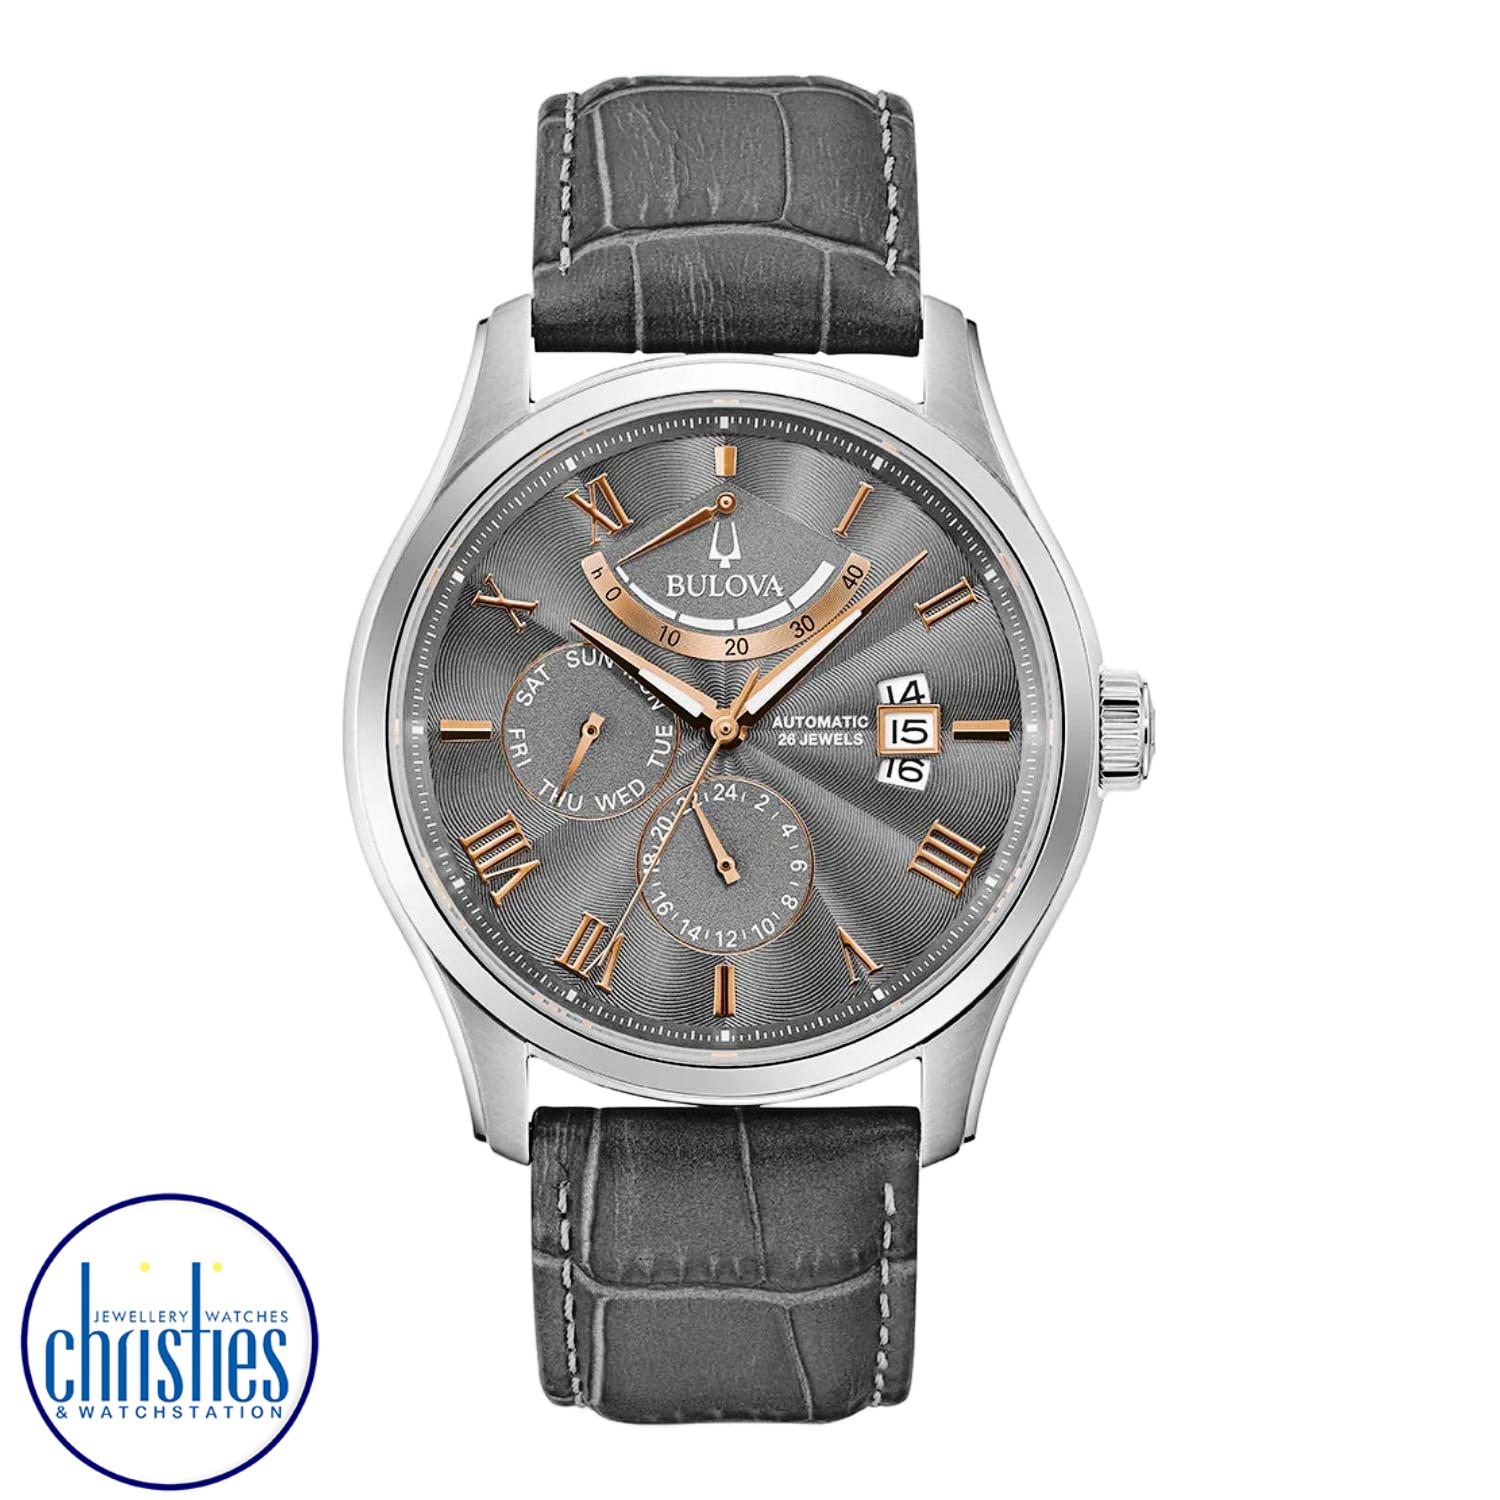 96C143 Bulova Men's Classic Automatic Watch. This watch boasts a stainless steel screw-back case and a gray six-hand dial with rose gold-tone Roman numerals and markers, and a 40-hour power reserve indicator at the 12 o'clock position.